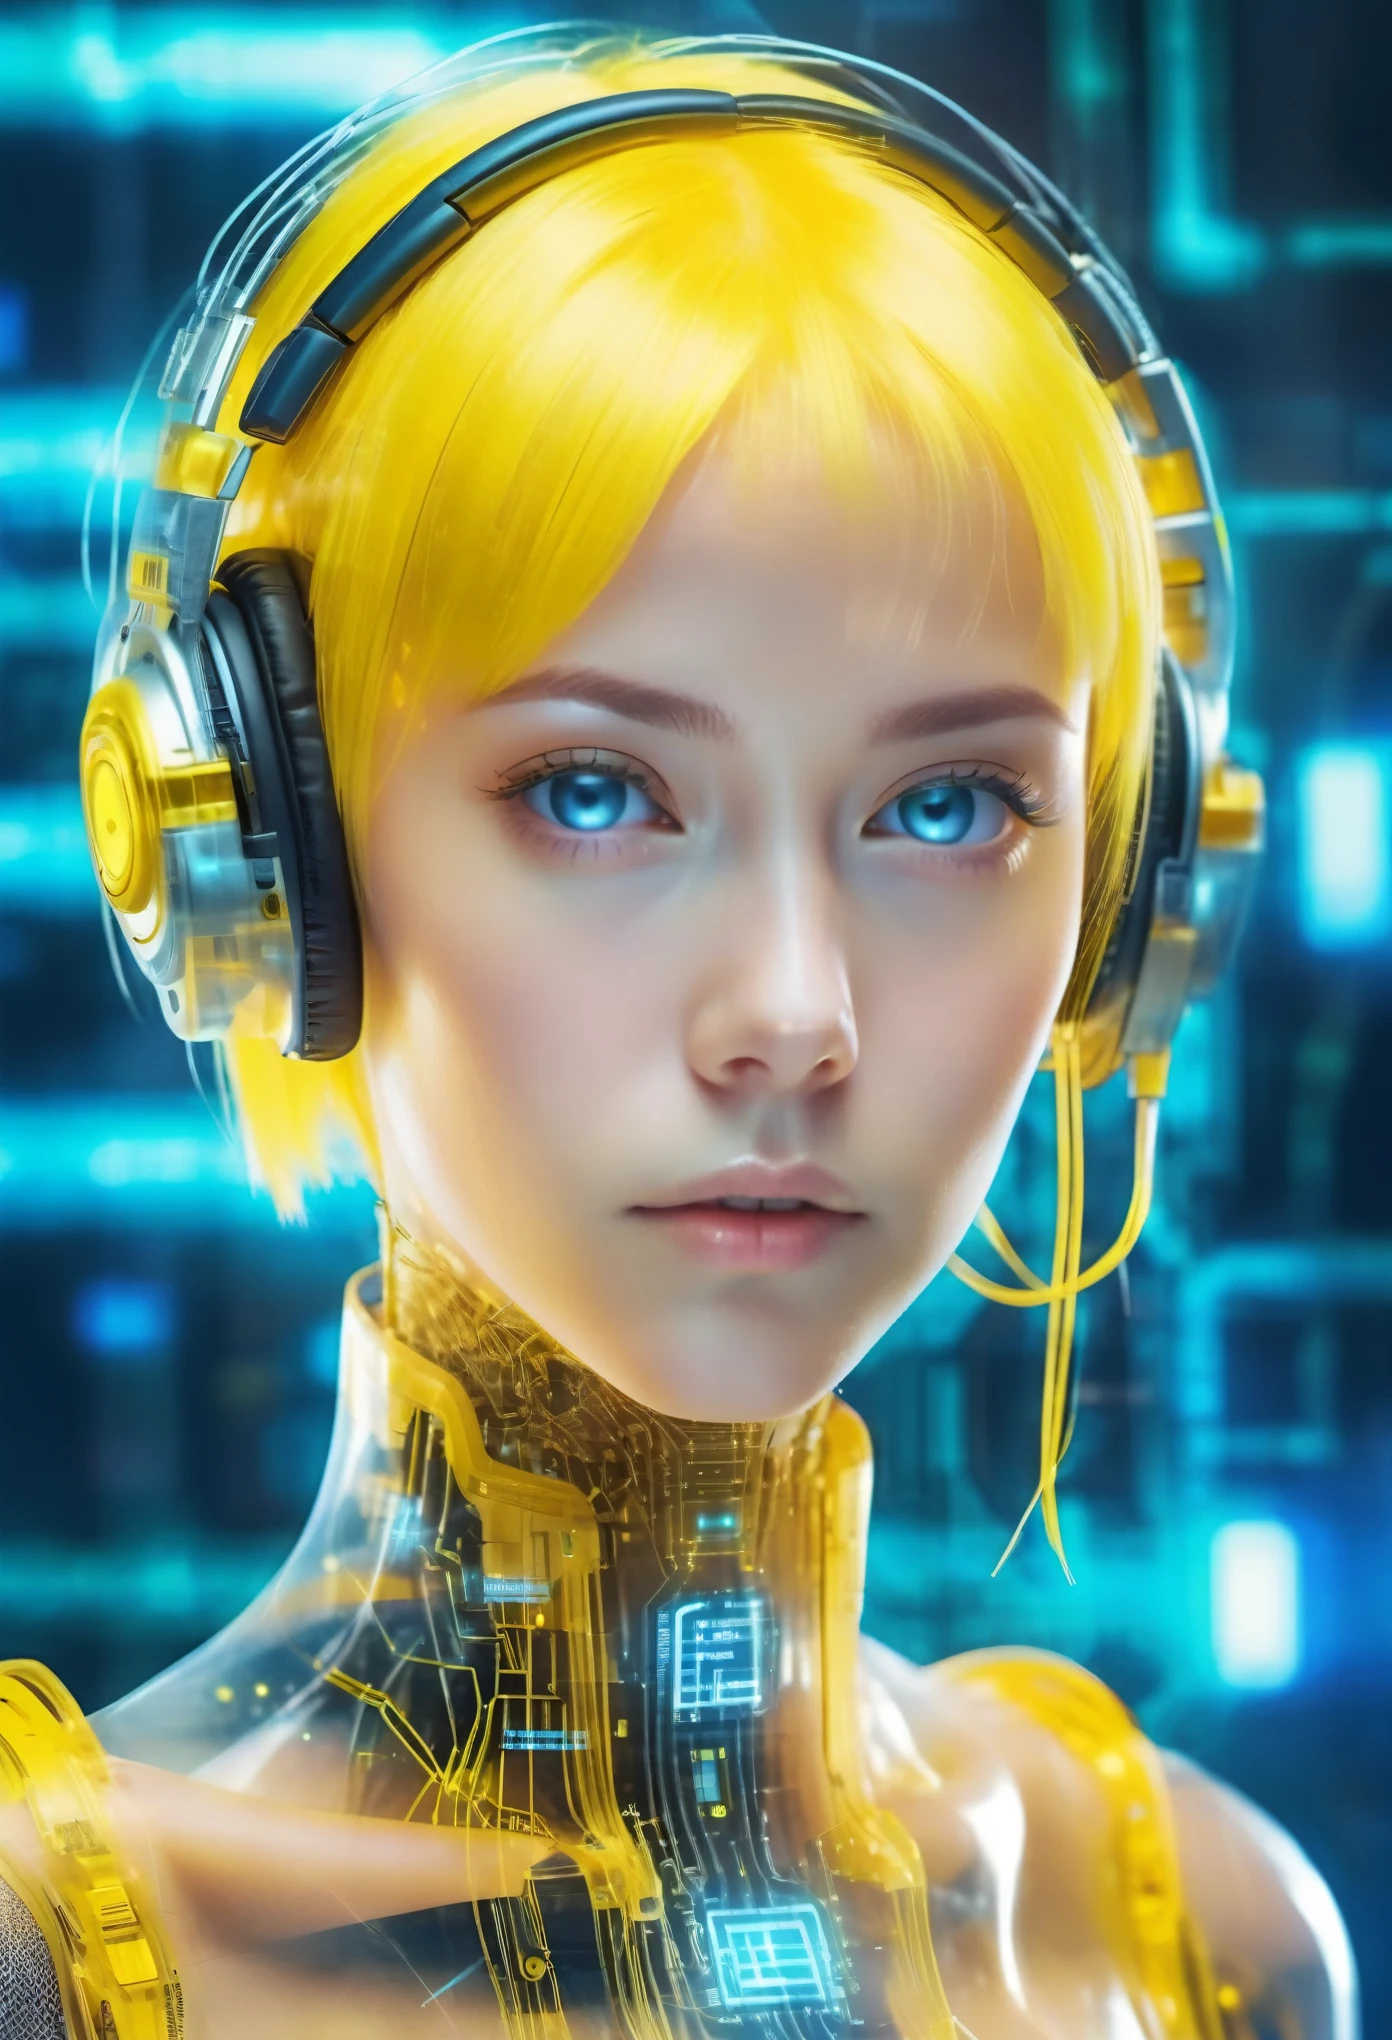 The face of a translucent ethereal mechanical  girl，Futuristic  2b girl face，short yellow hair, Mechanical connection technology girl face，with headphone ,futuristic matrix code blue background